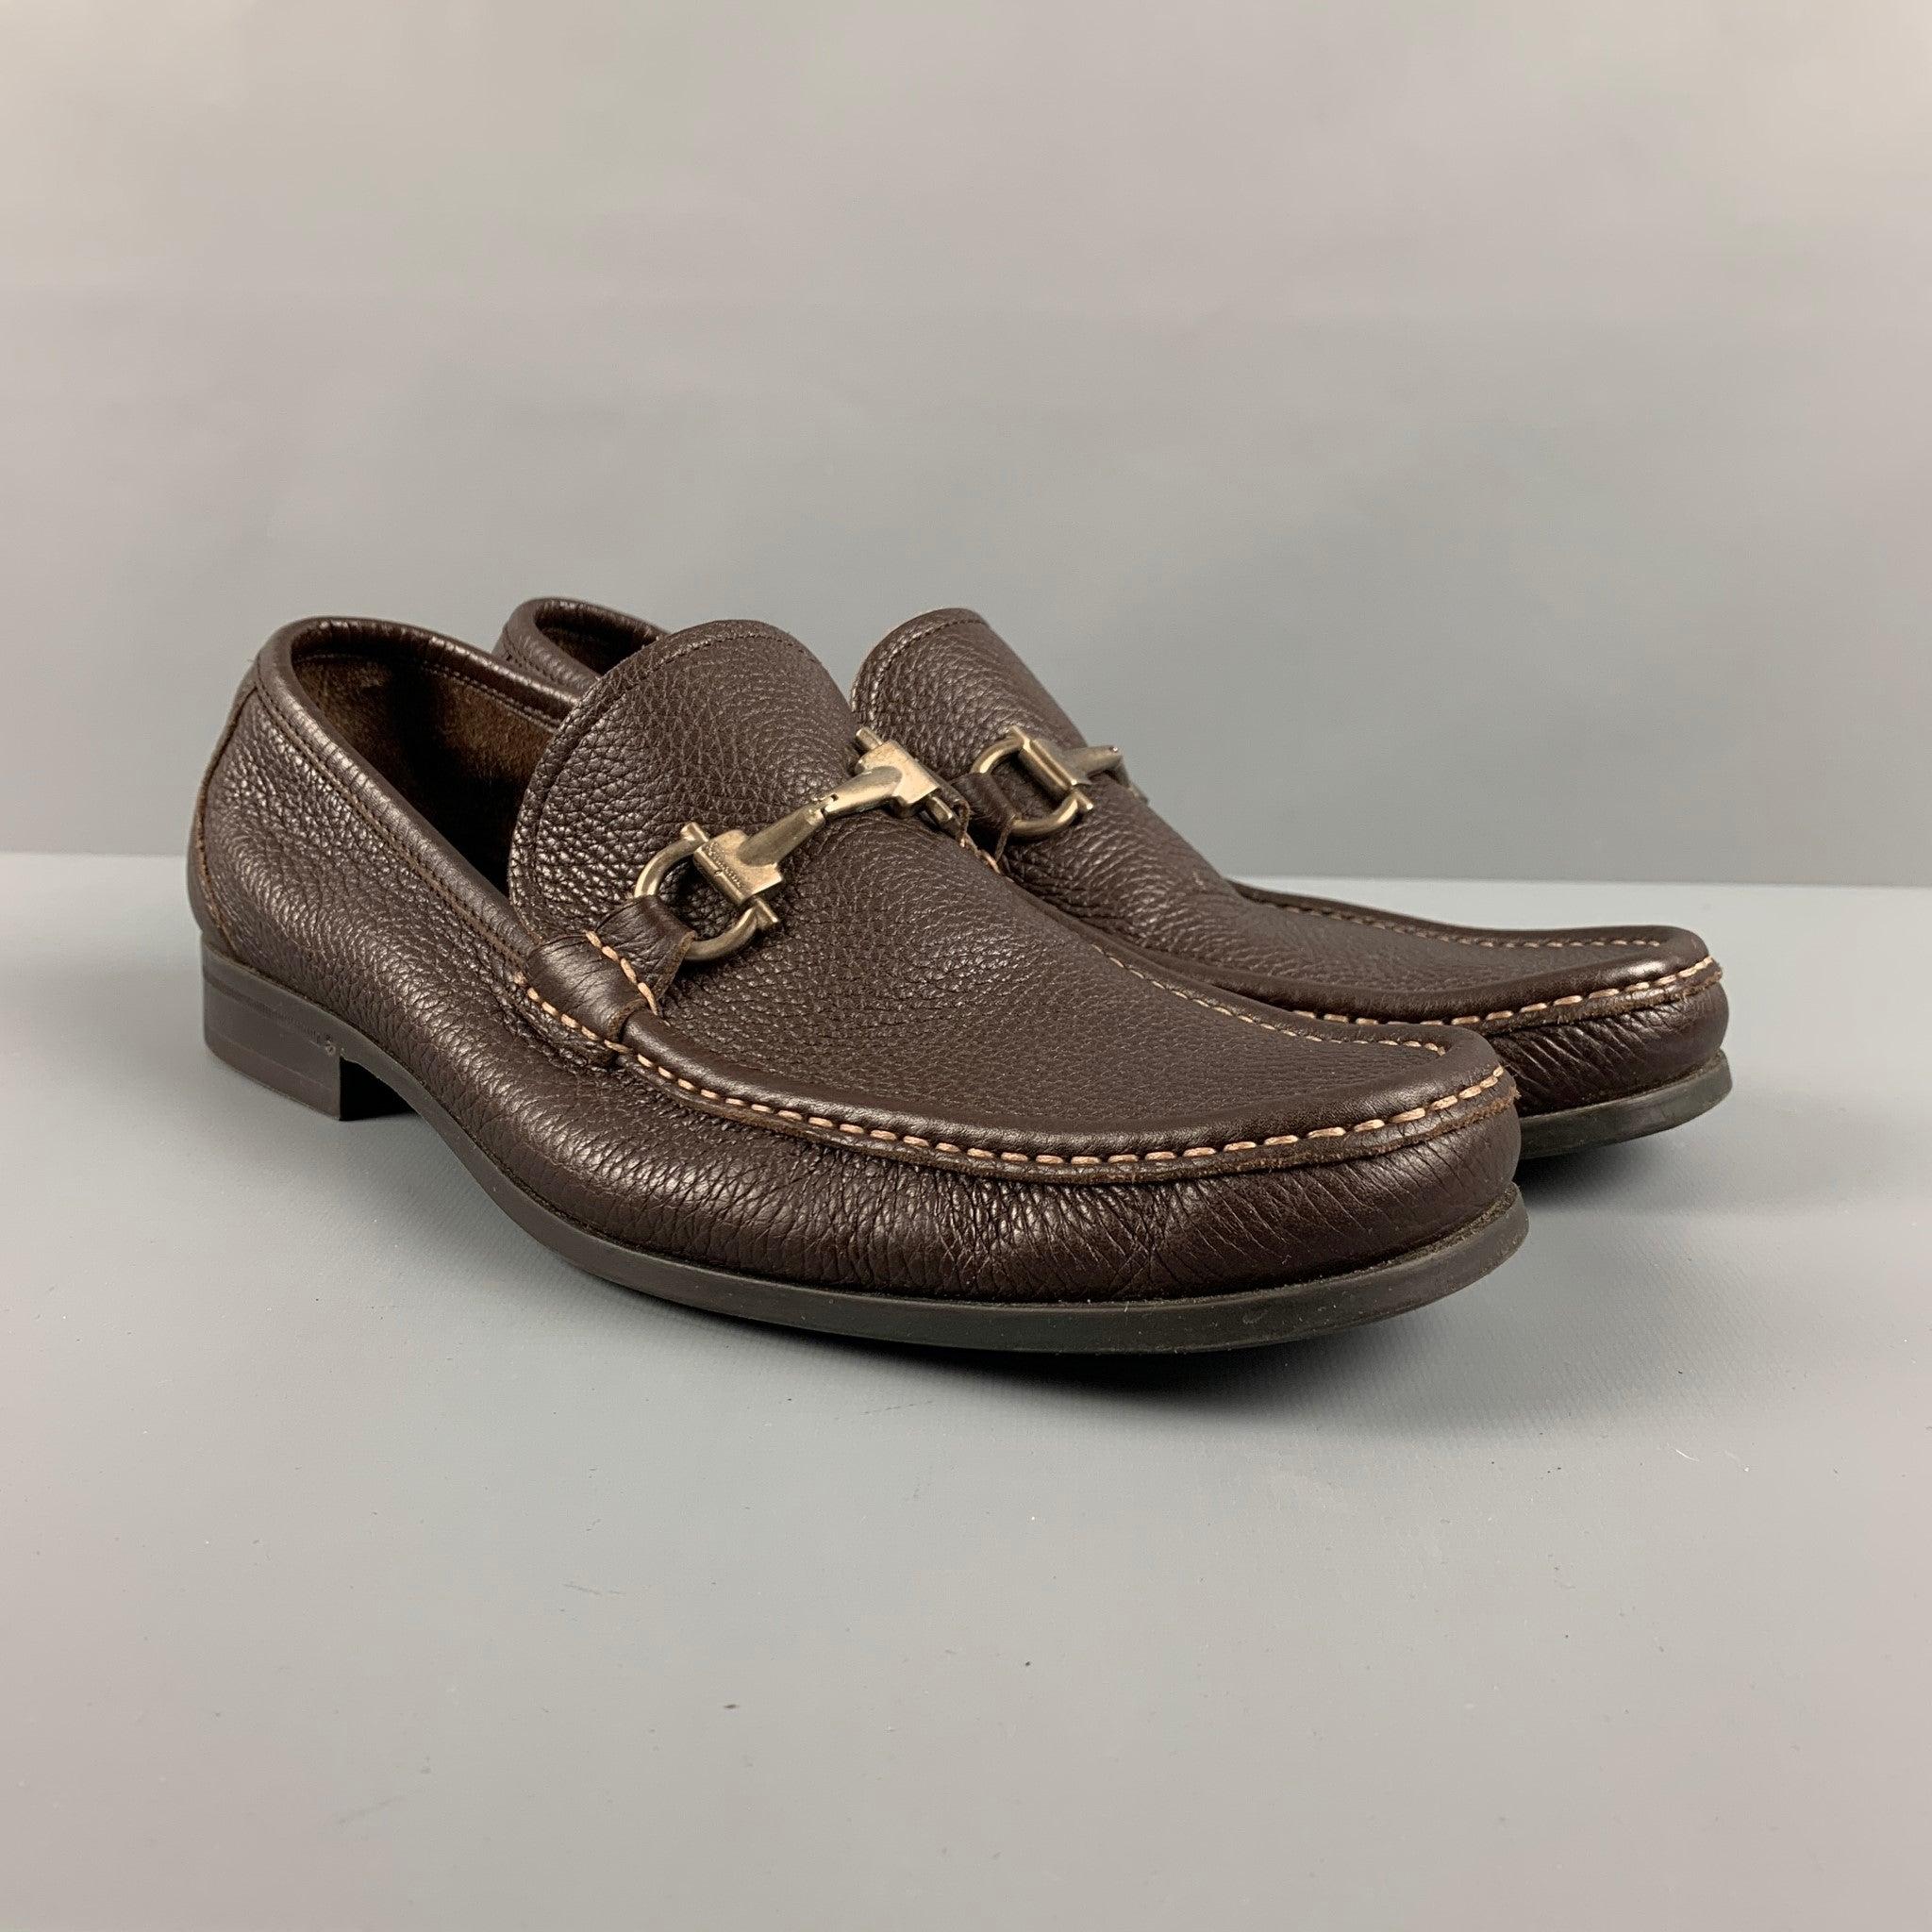 SALVATORE FERRAGAMO loafers comes in a brown pebble grain leather featuring a horse bit detail, and a slip on detail. Includes dust bag. Made in Italy.Very Good Pre-Owned Condition. Minor signs of wear. 

Marked:   TN 13547 9 1/2 1dOutsole: 10.5